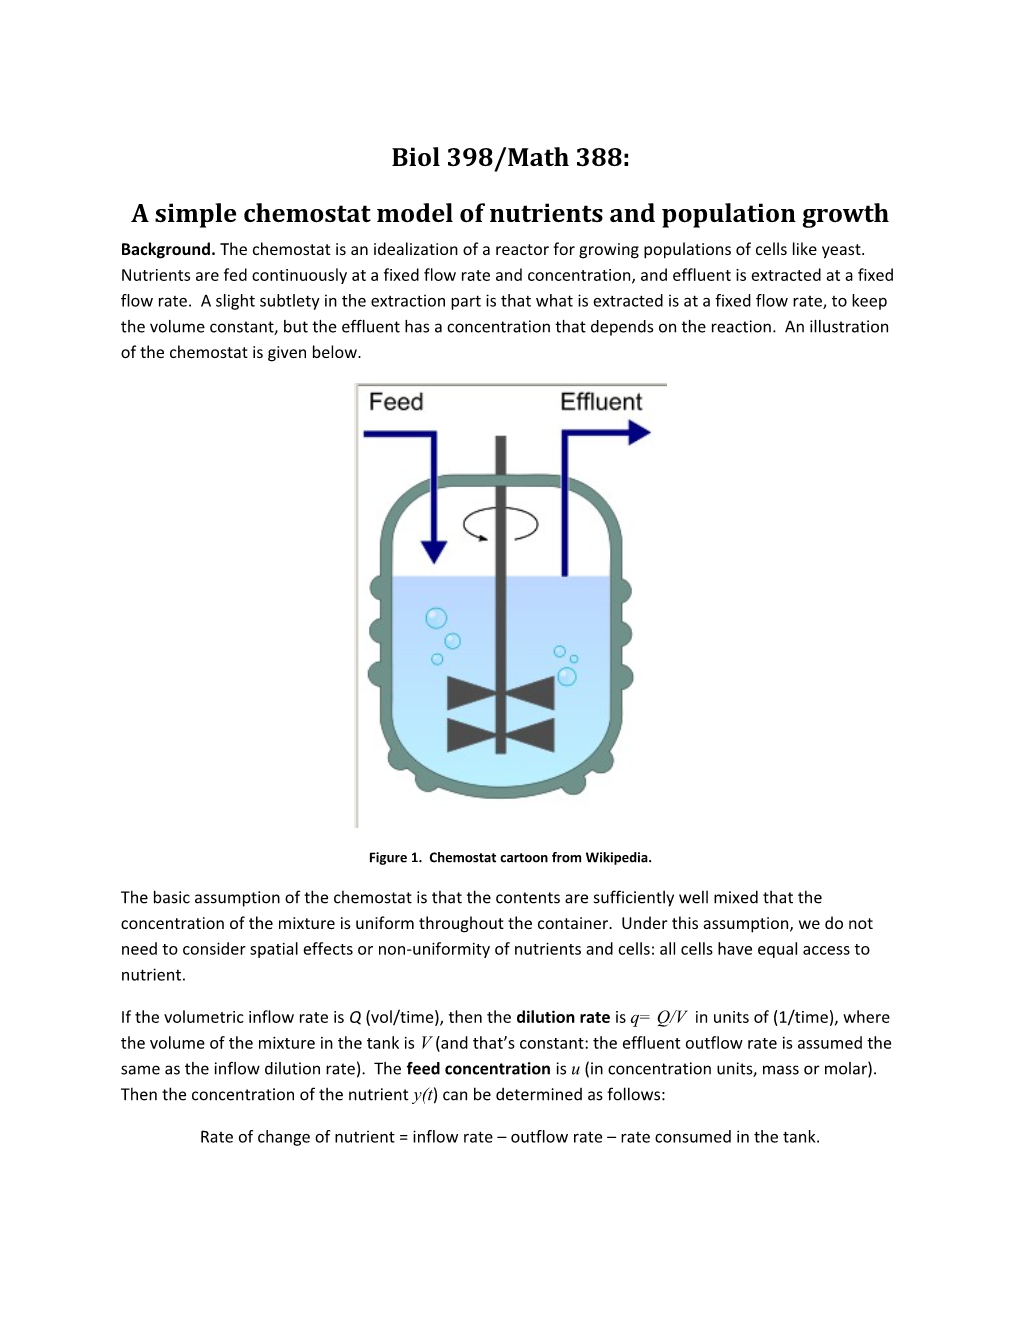 A Simple Chemostat Model of Nutrients and Population Growth